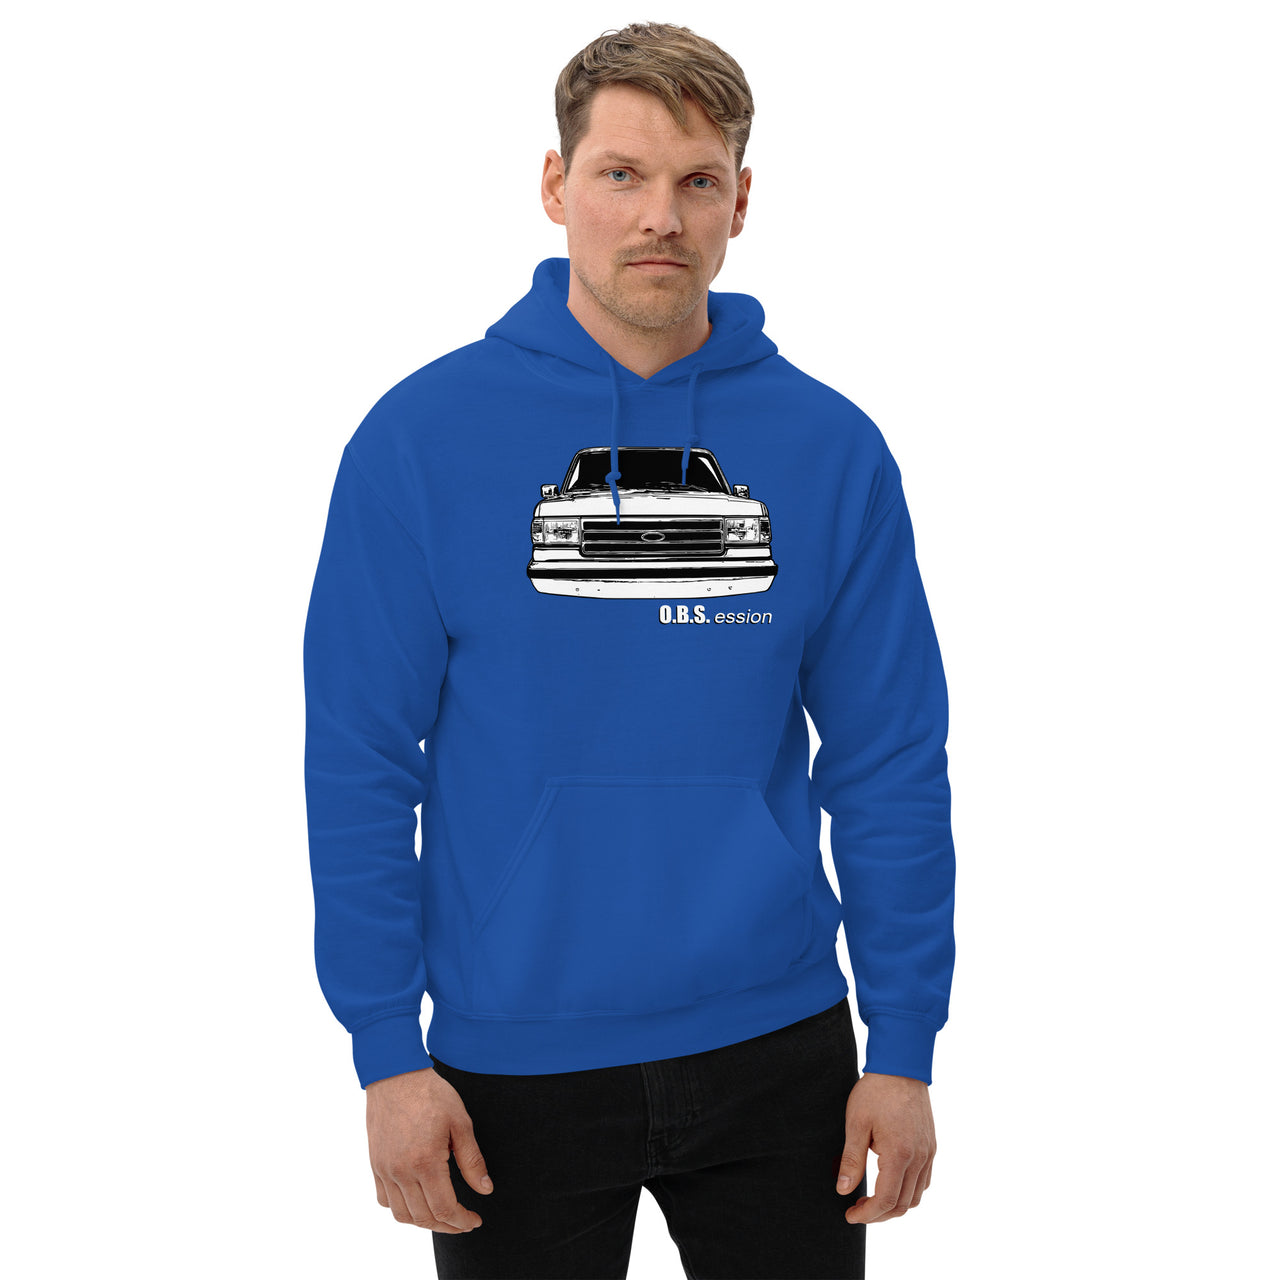 Brick Nose OBS Truck Hoodie modeled in royal